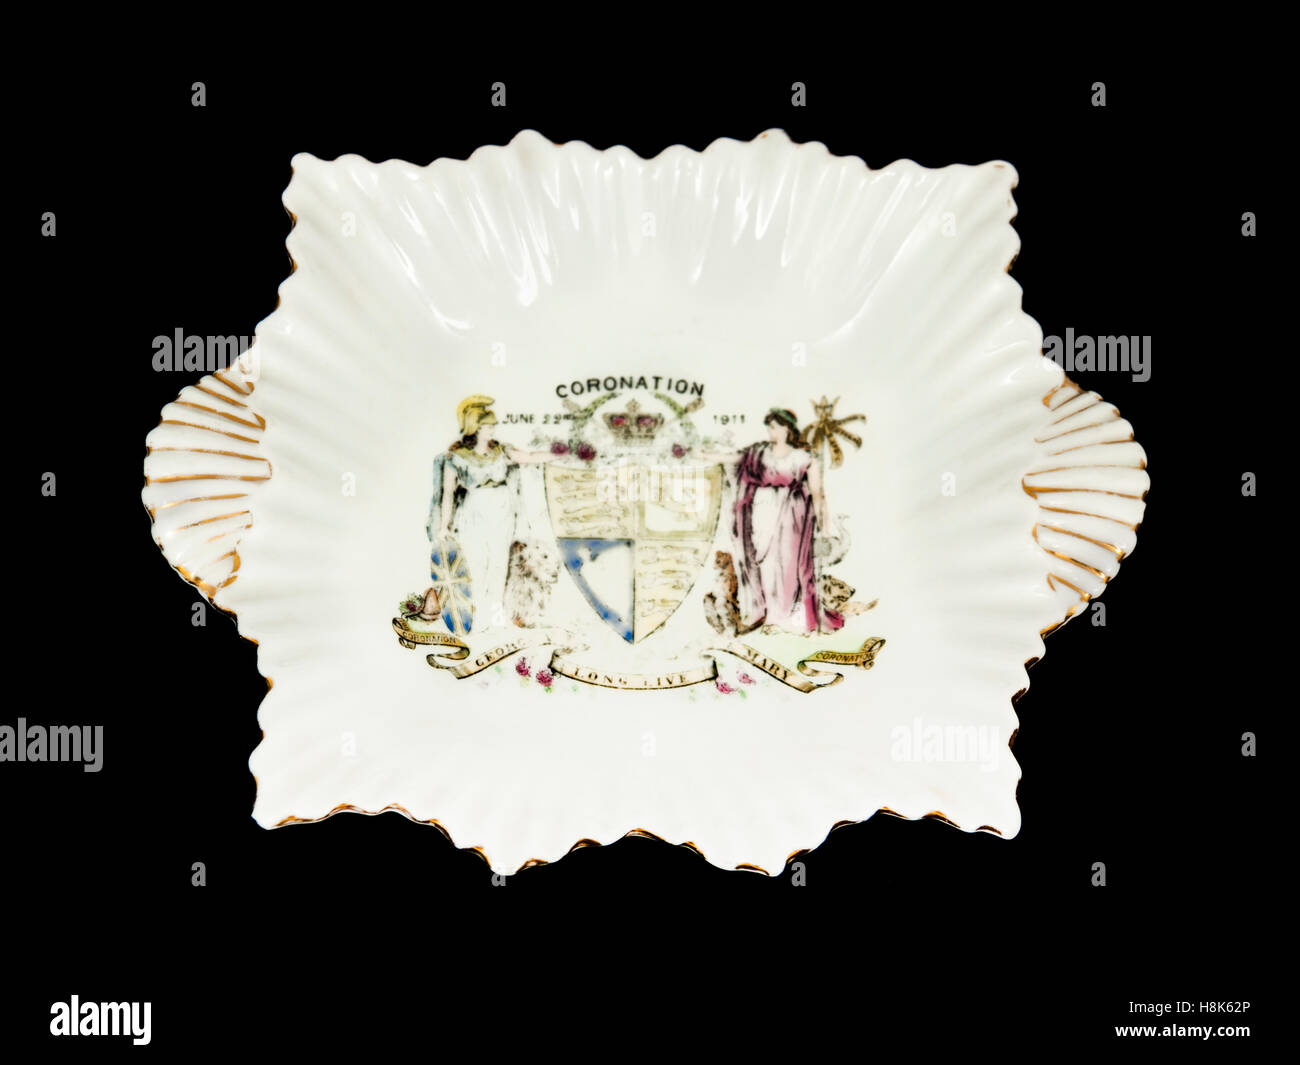 Fine bone china coronation plate by Shelley (Late Folley) to commemorate the Coronation of King George V on 22nd June 1911 Stock Photo